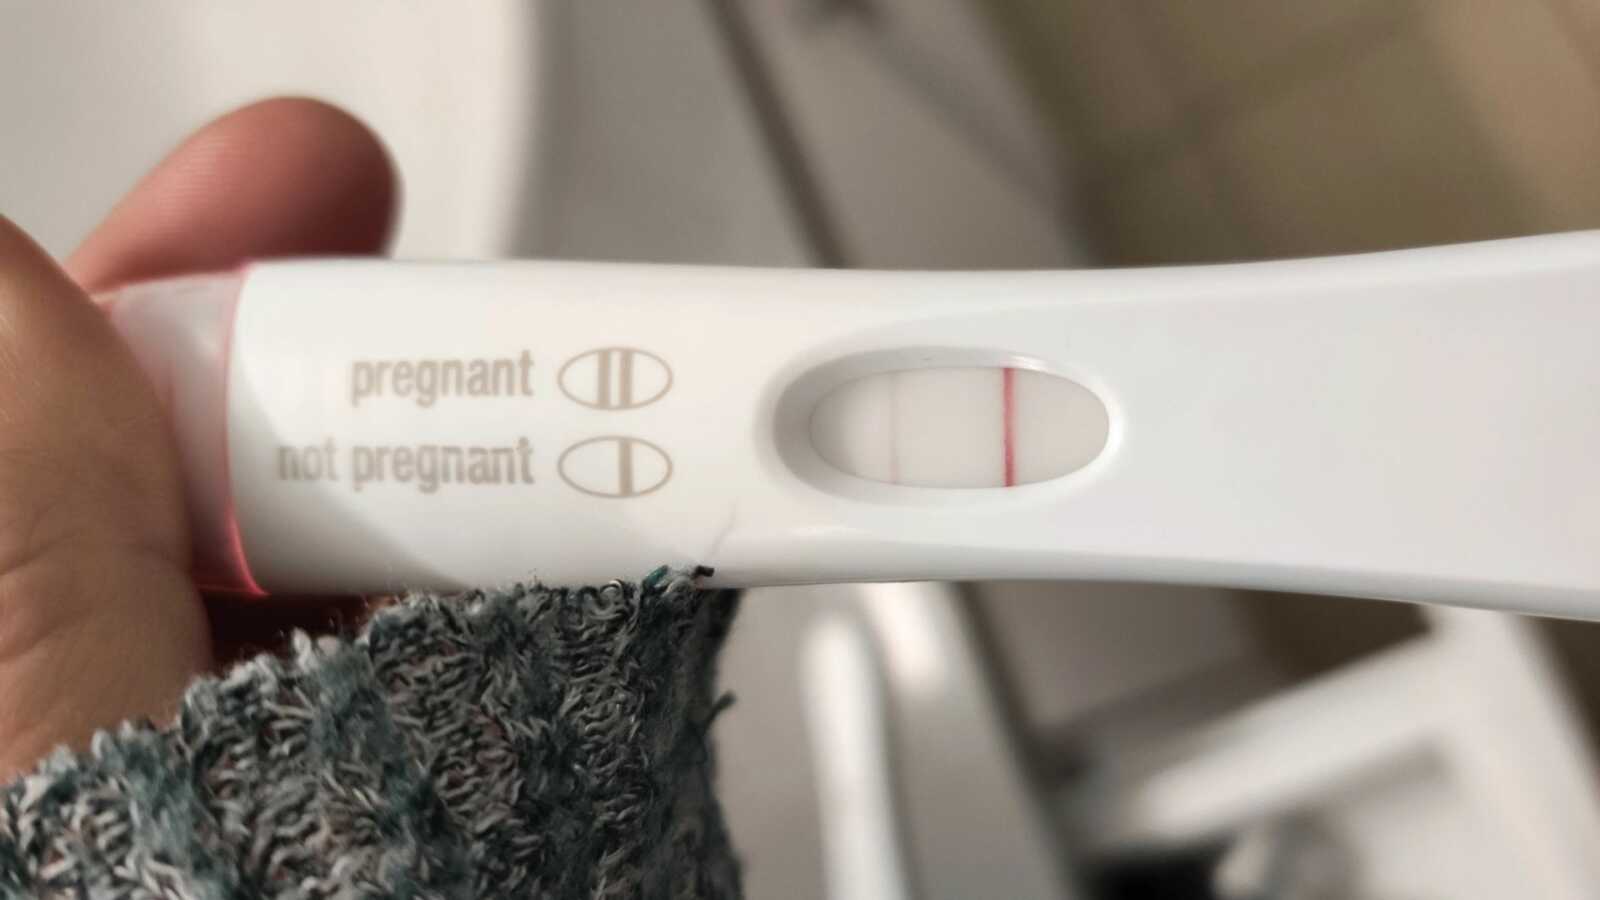 positive pregnancy test after a child loss